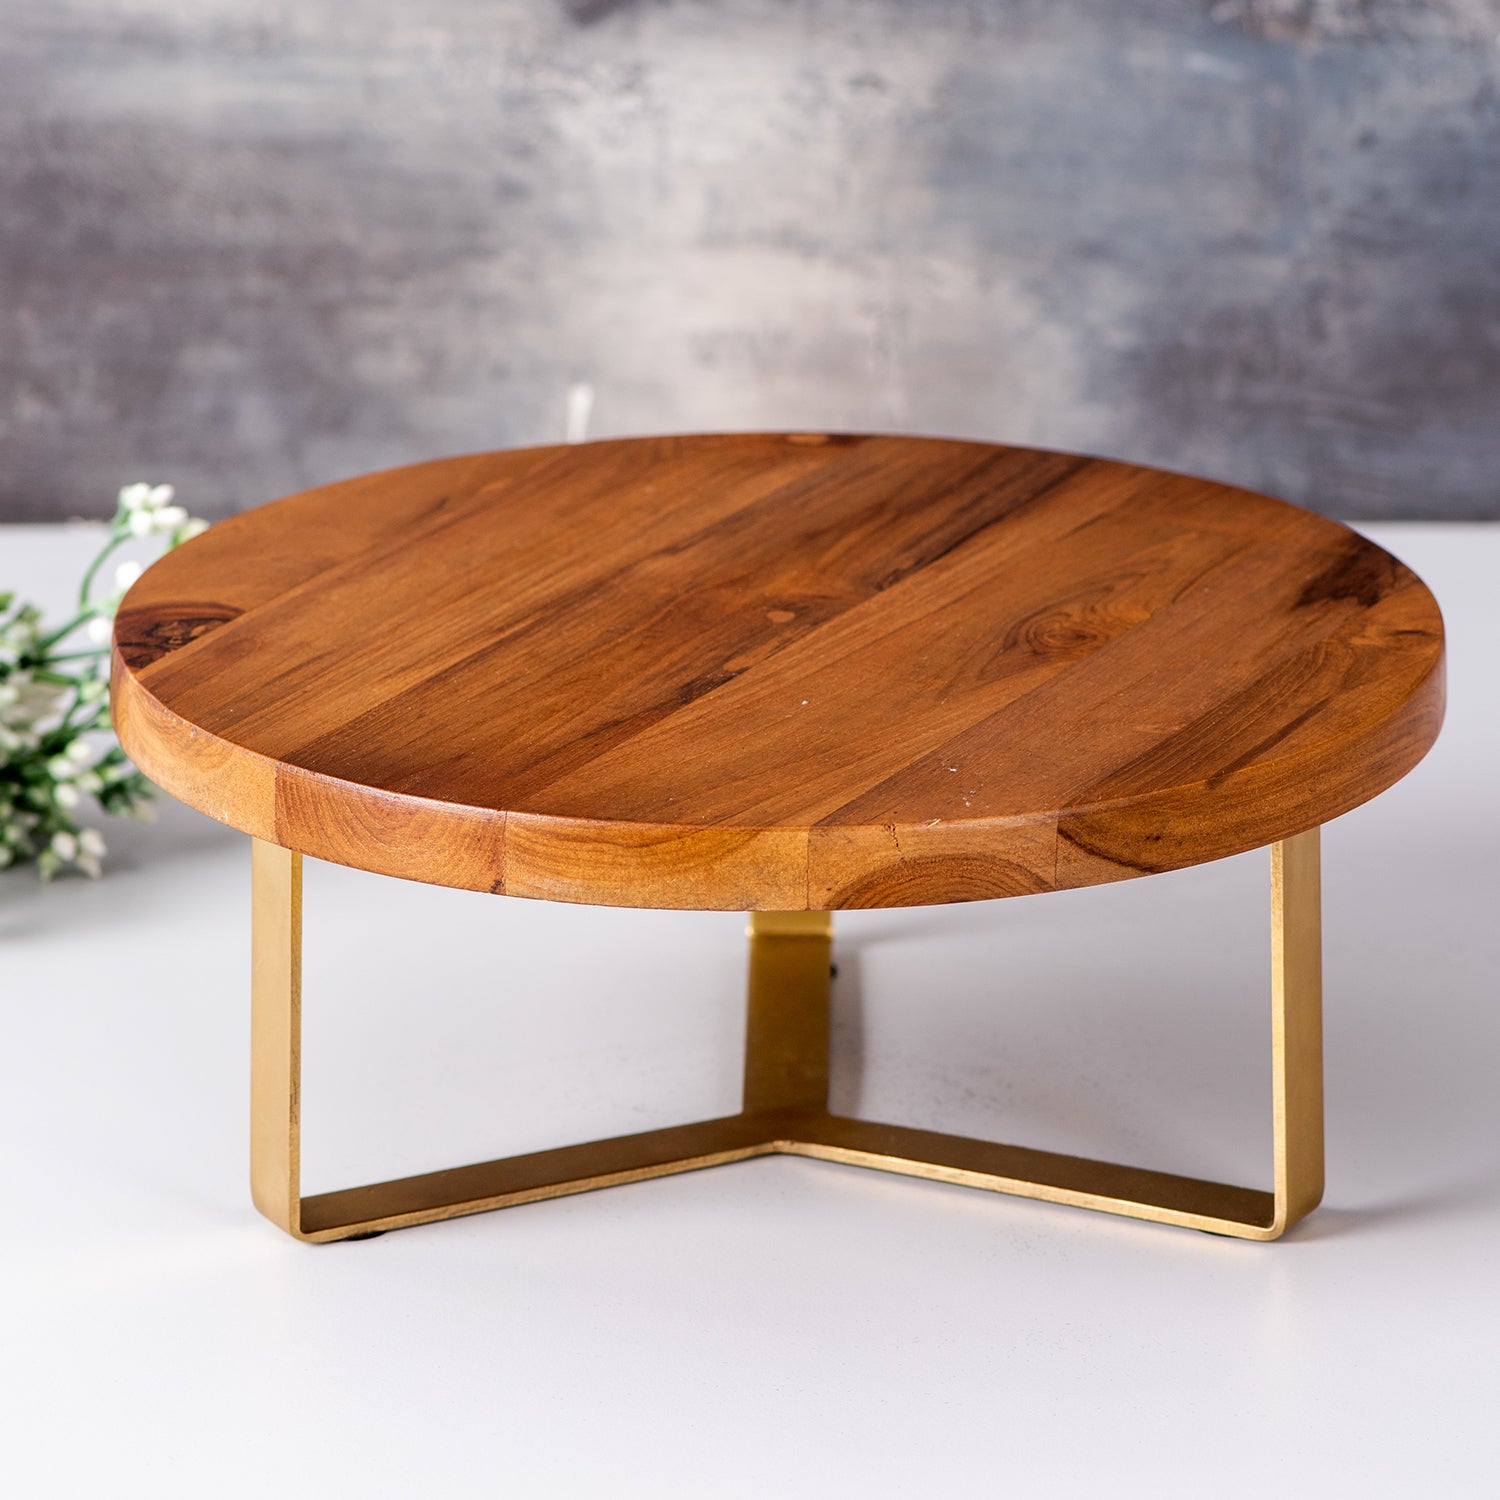 Buy Brown and Green Wooden Cake Stand Online in India at Best